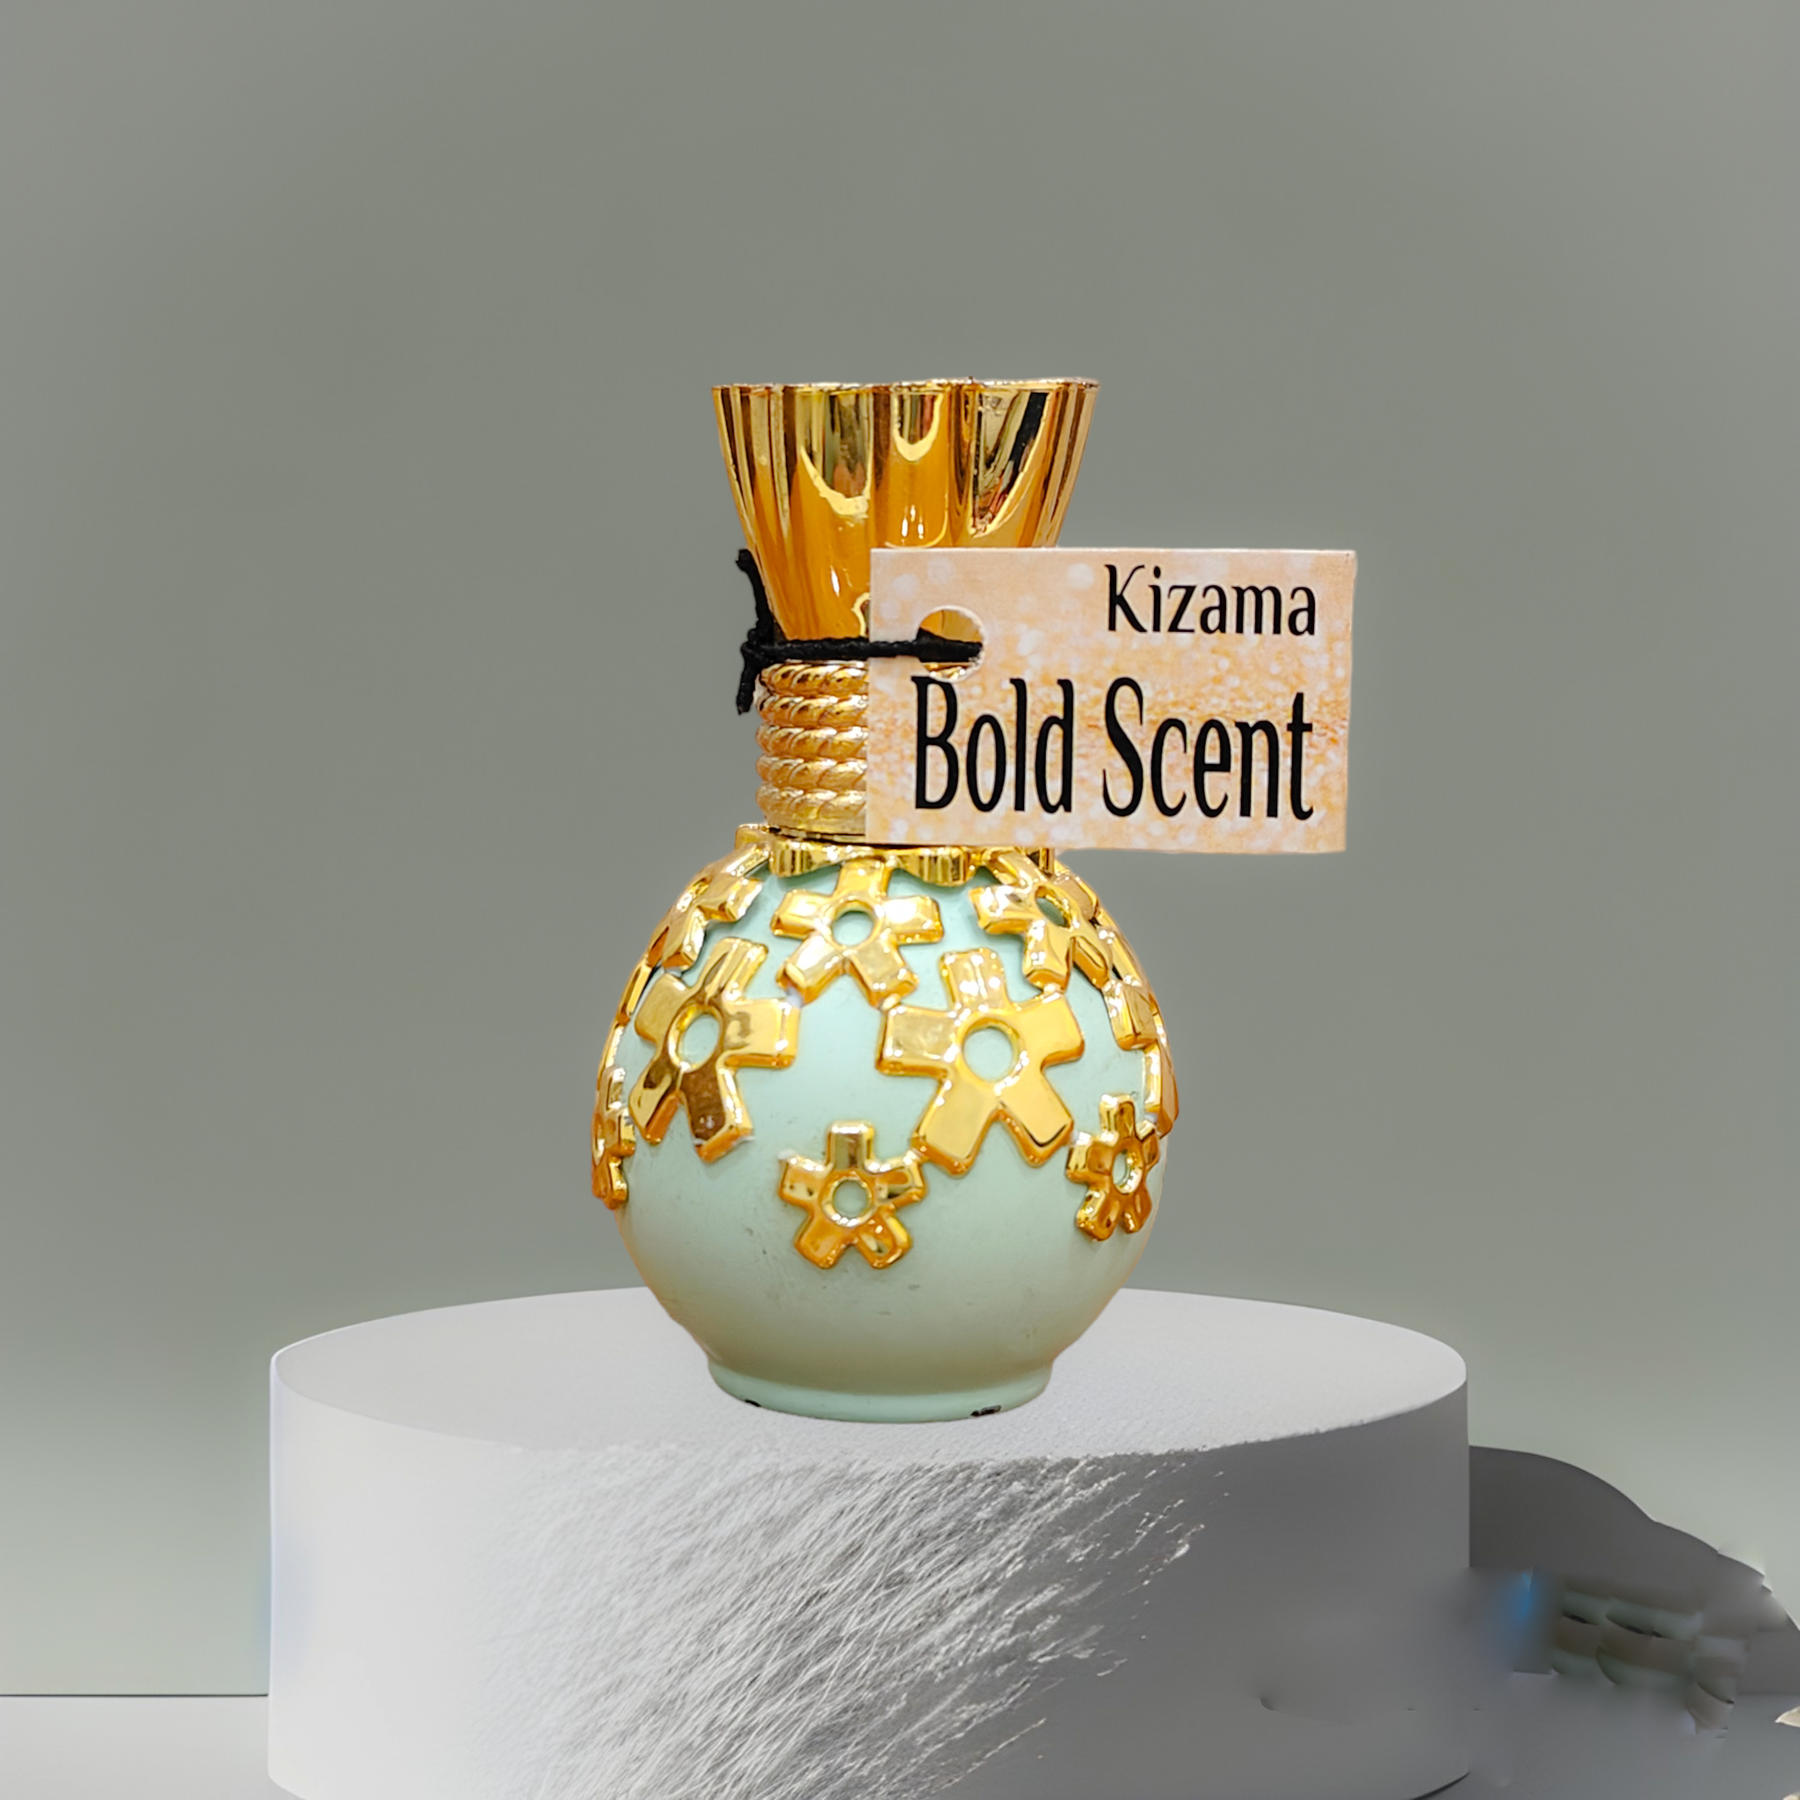 Kizama Bold Scent Attar for Men inspired by Jacques bogart Silver Scent II Best for Party Wear